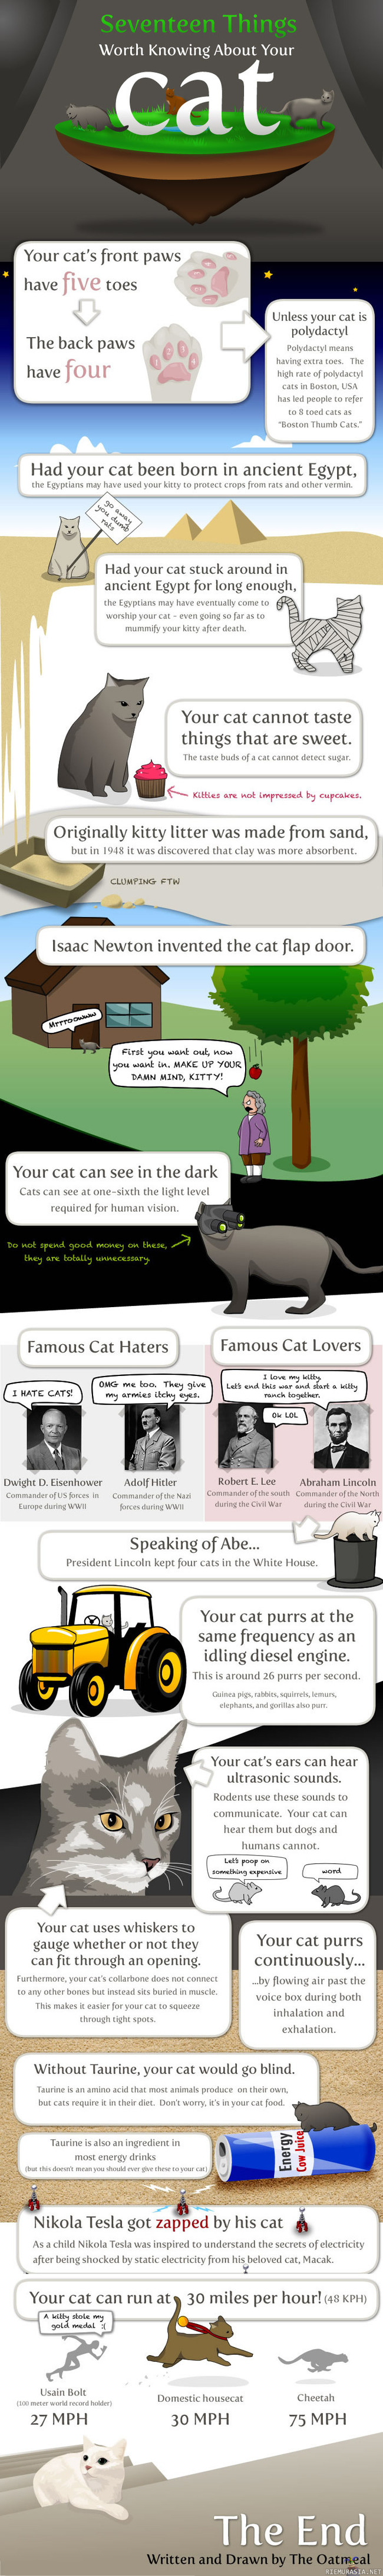 Seventeen things worth knowing about your cat